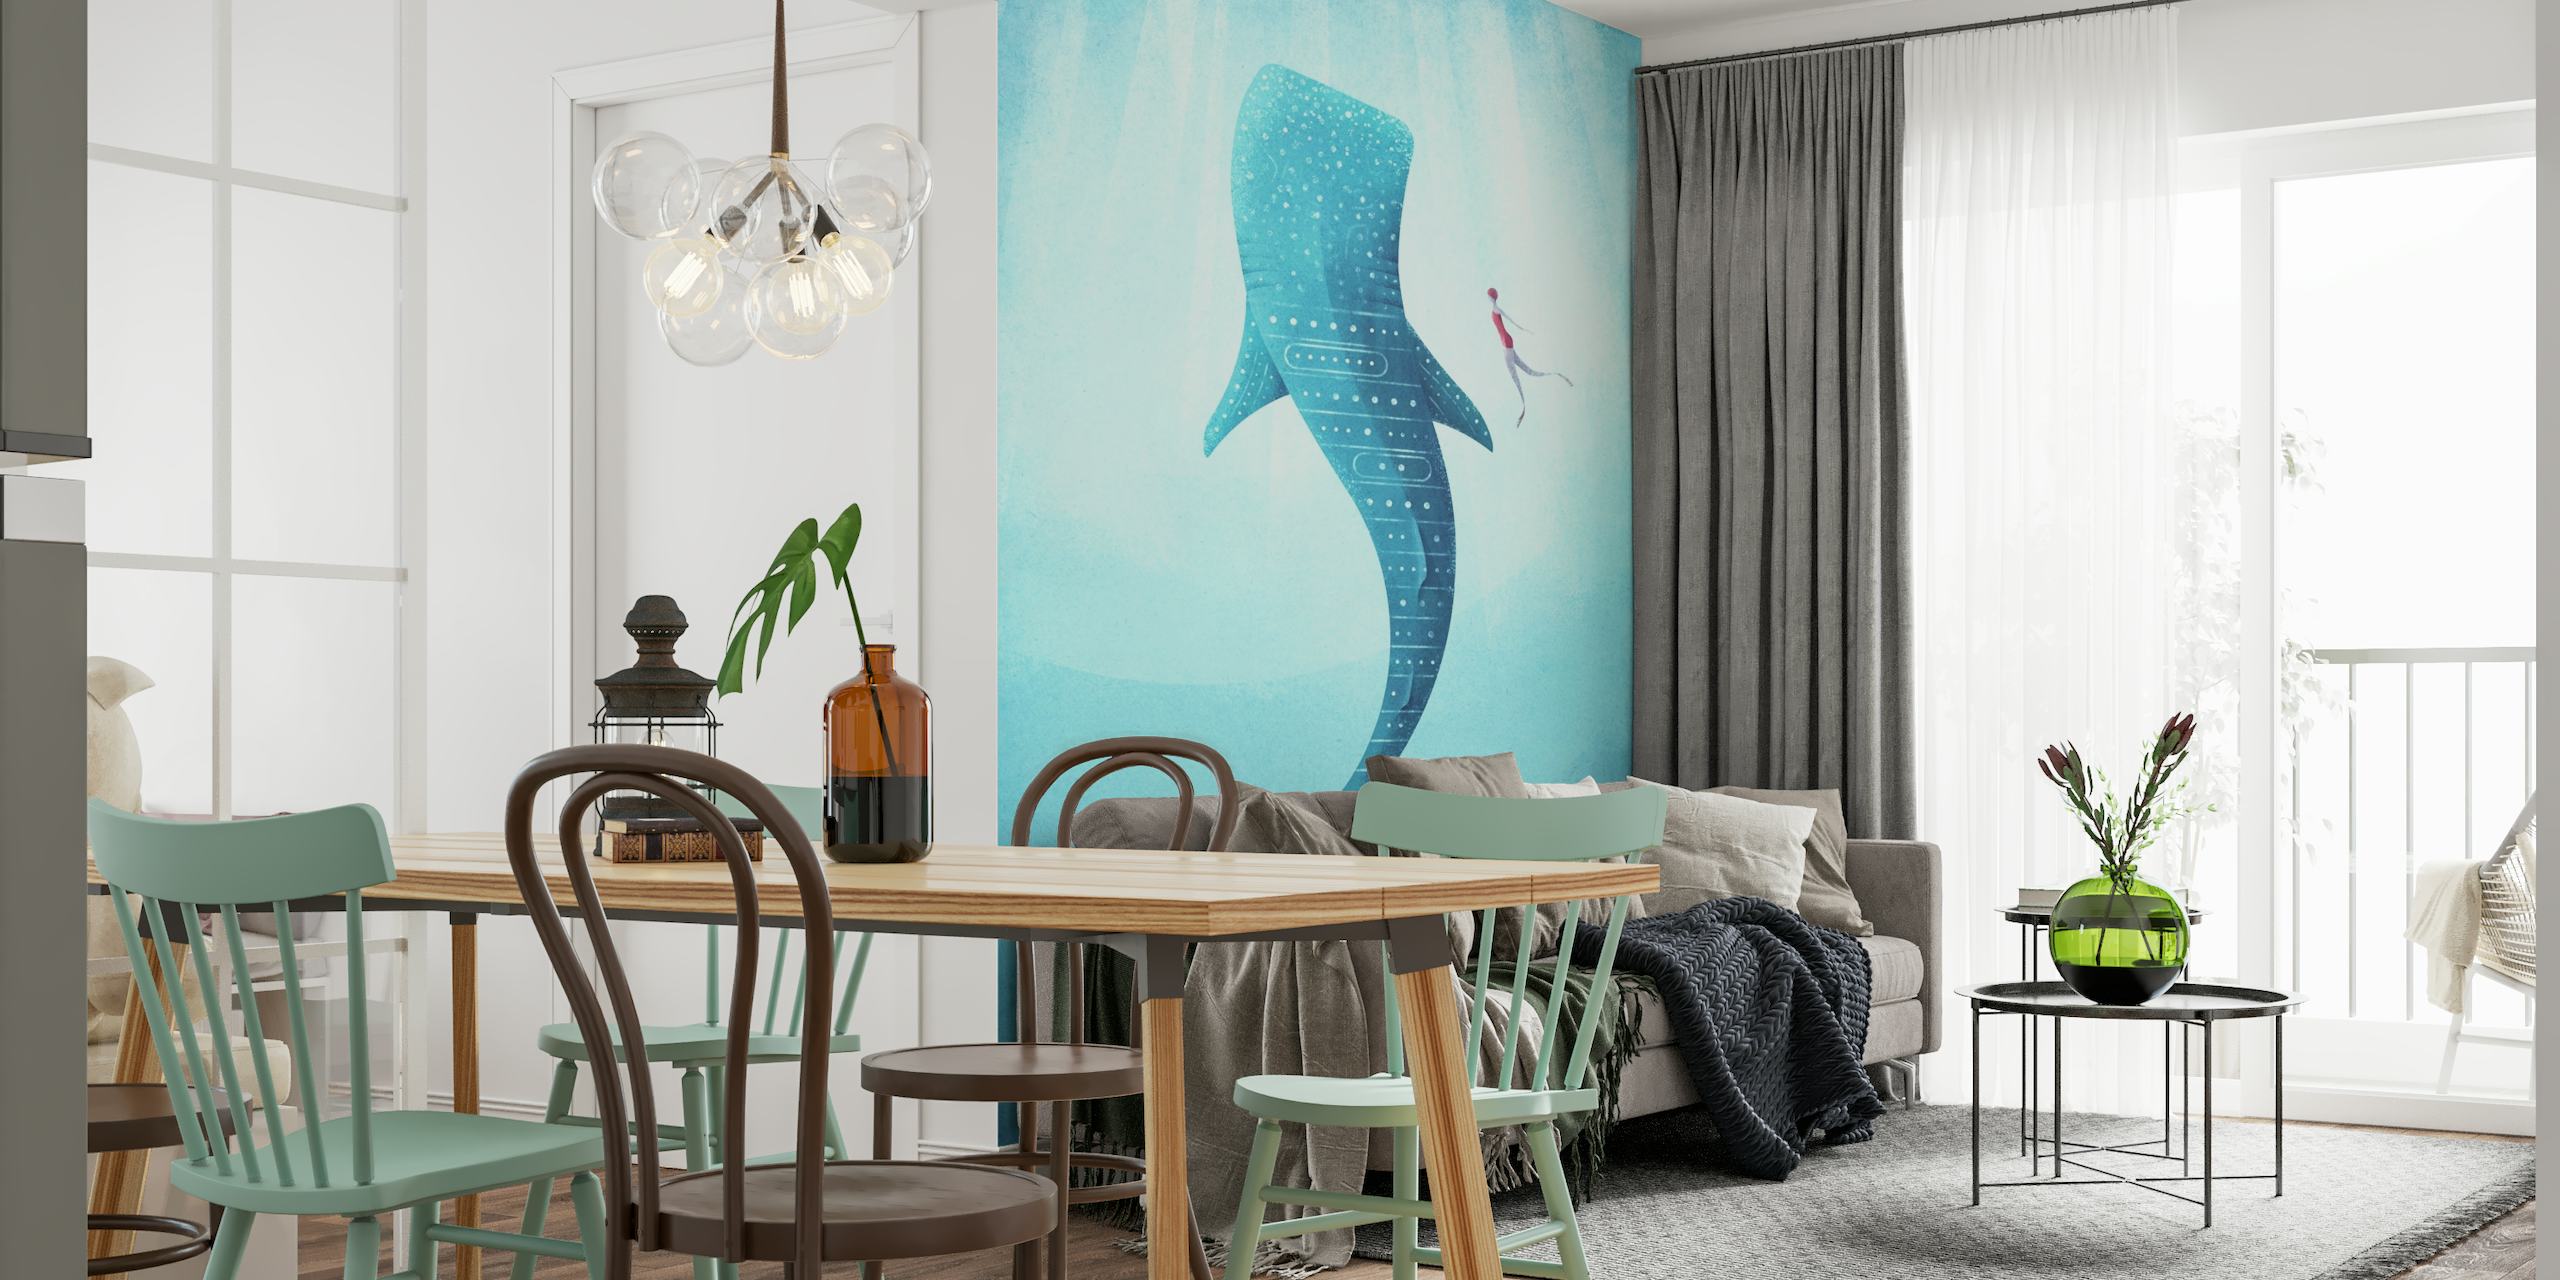 Blue whale shark wall mural with underwater scene